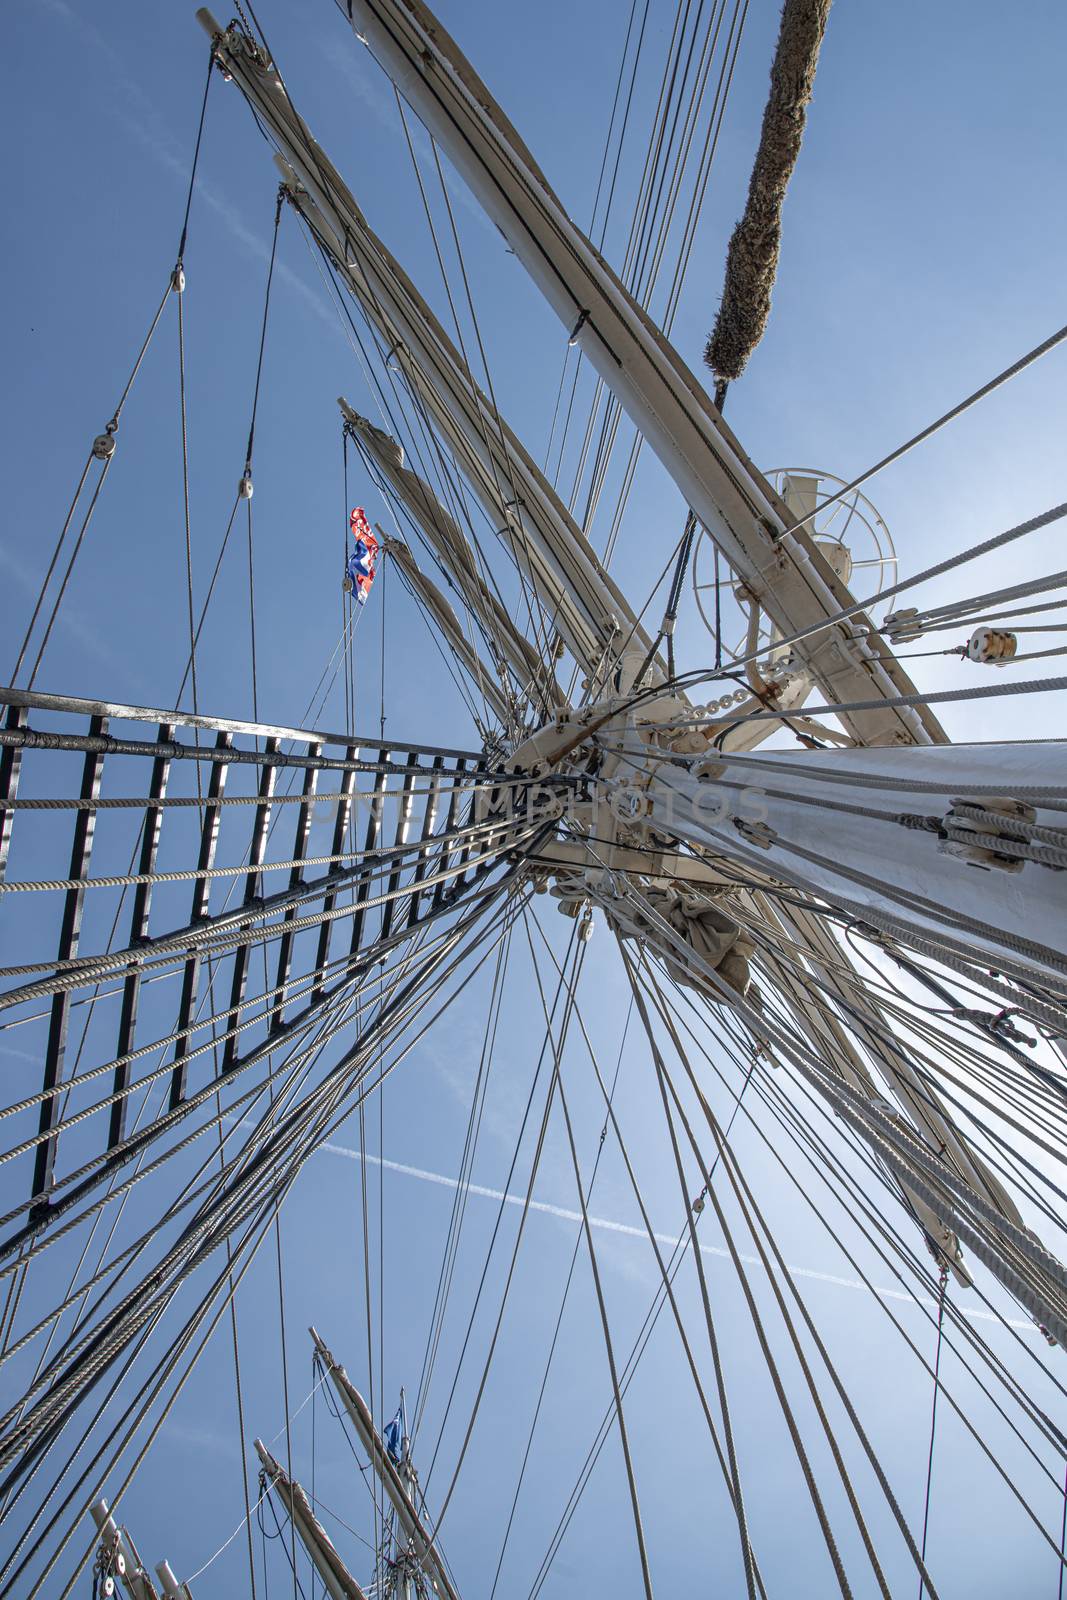 Up view of a high tall ship mast surrounded by ropes and lather  by ankorlight